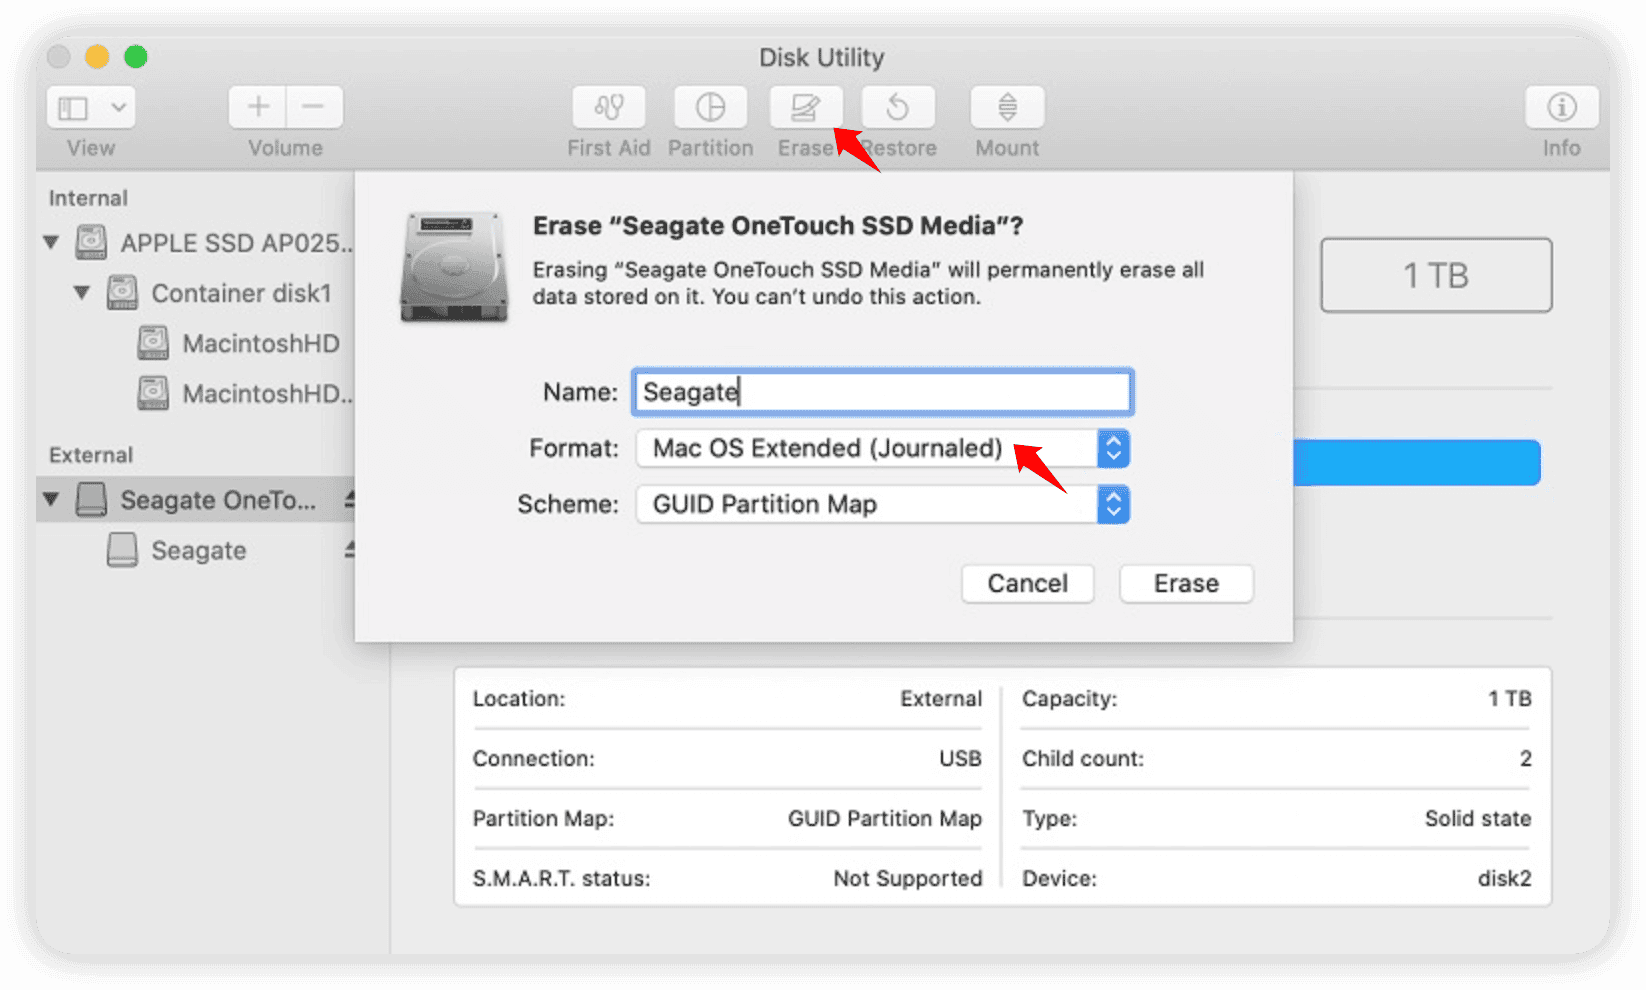 How to erase the external hard drive on Mac